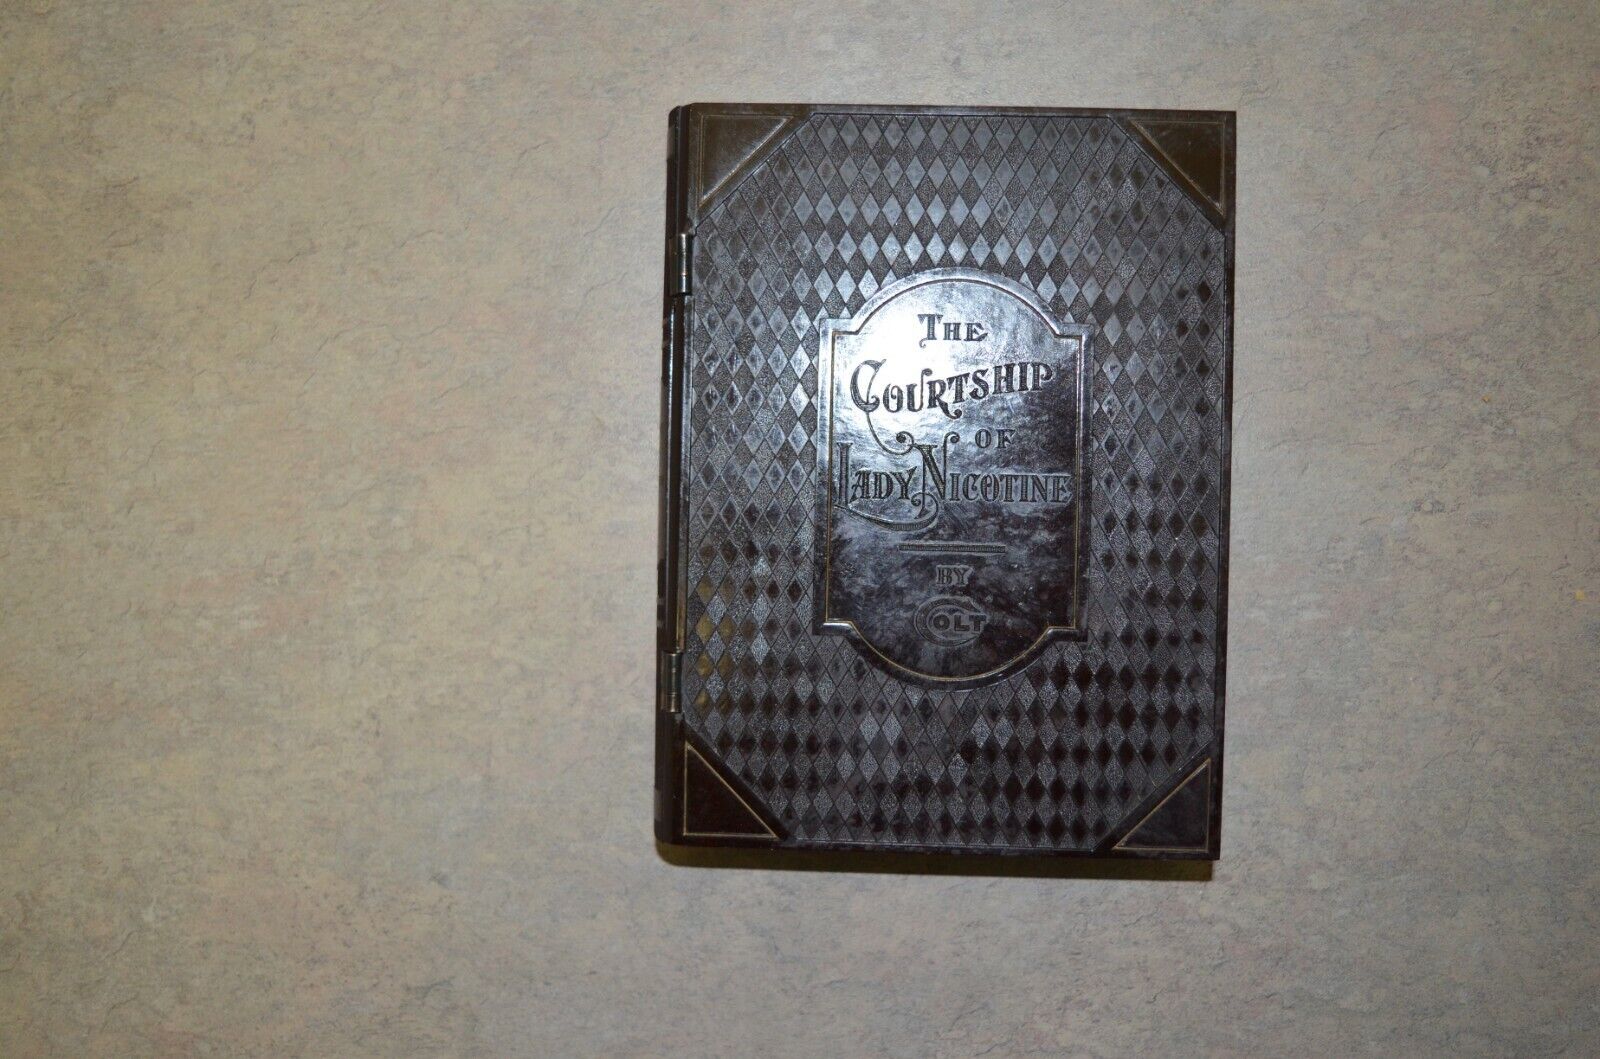 Coltrock Bakelite The Courtship of Lady Nicotine Cigarette Box Book made by Colt